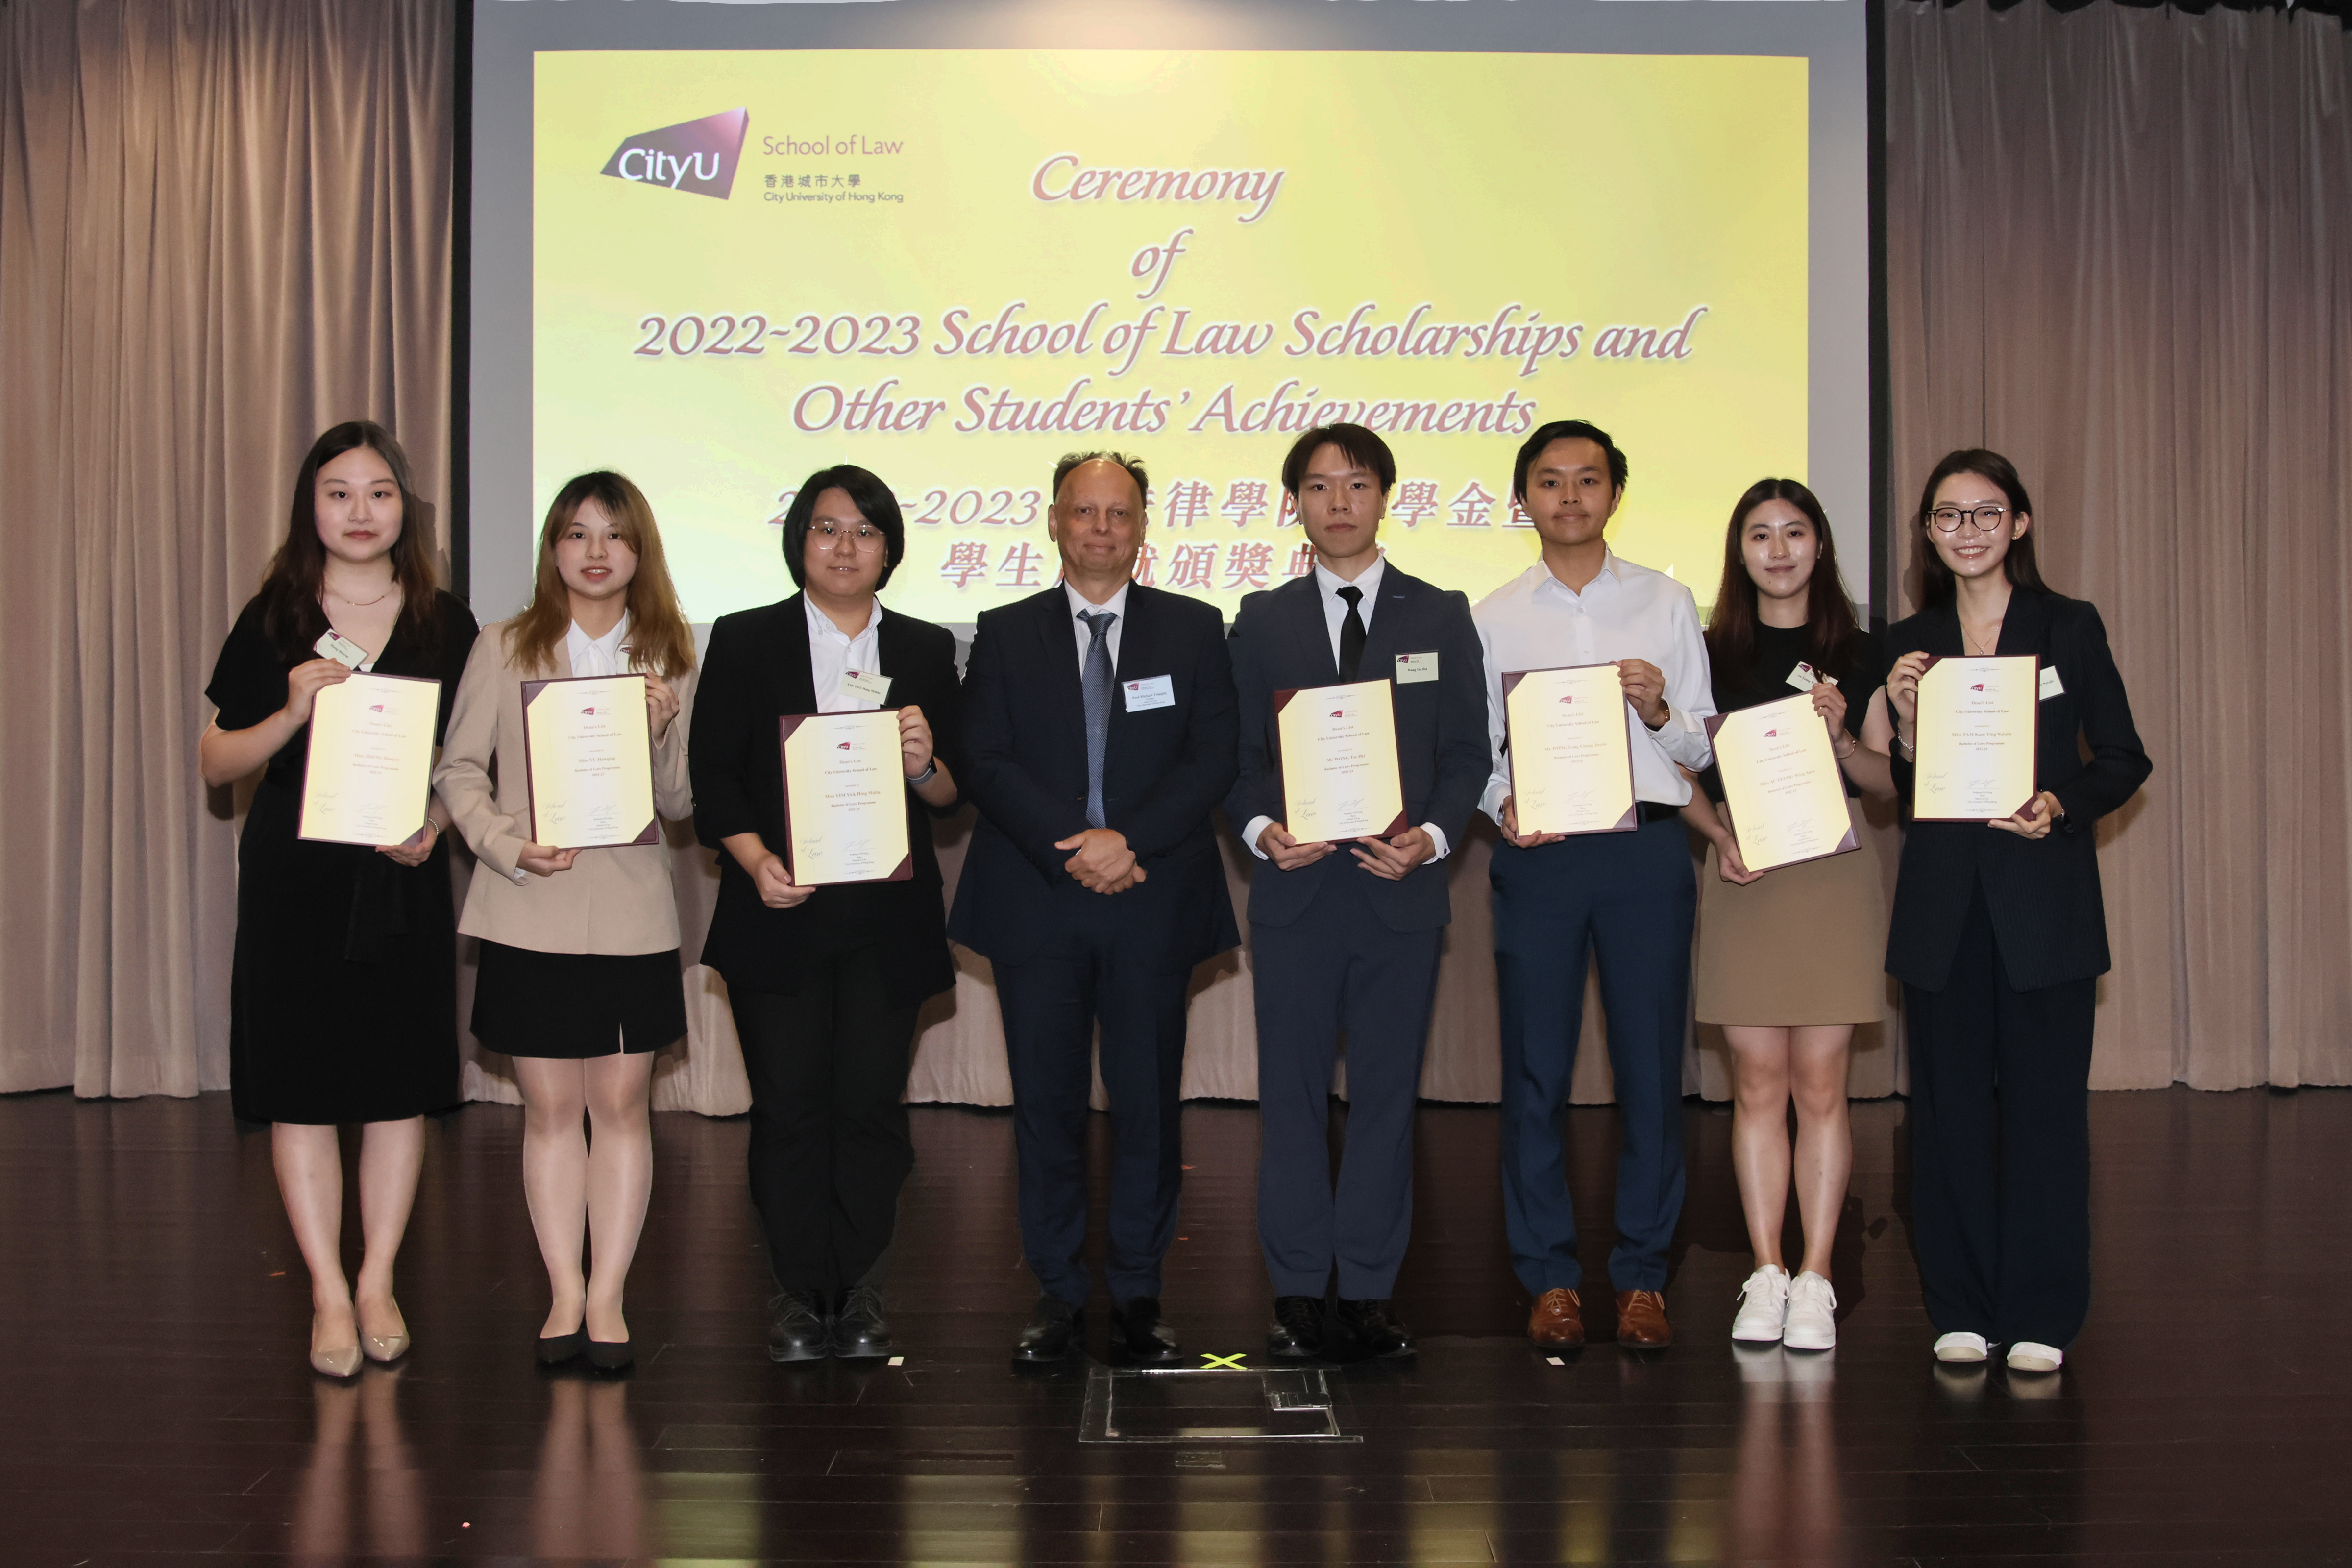 Ceremony of 2022-2023 School of Law Scholarships and Other Students’ Achievements